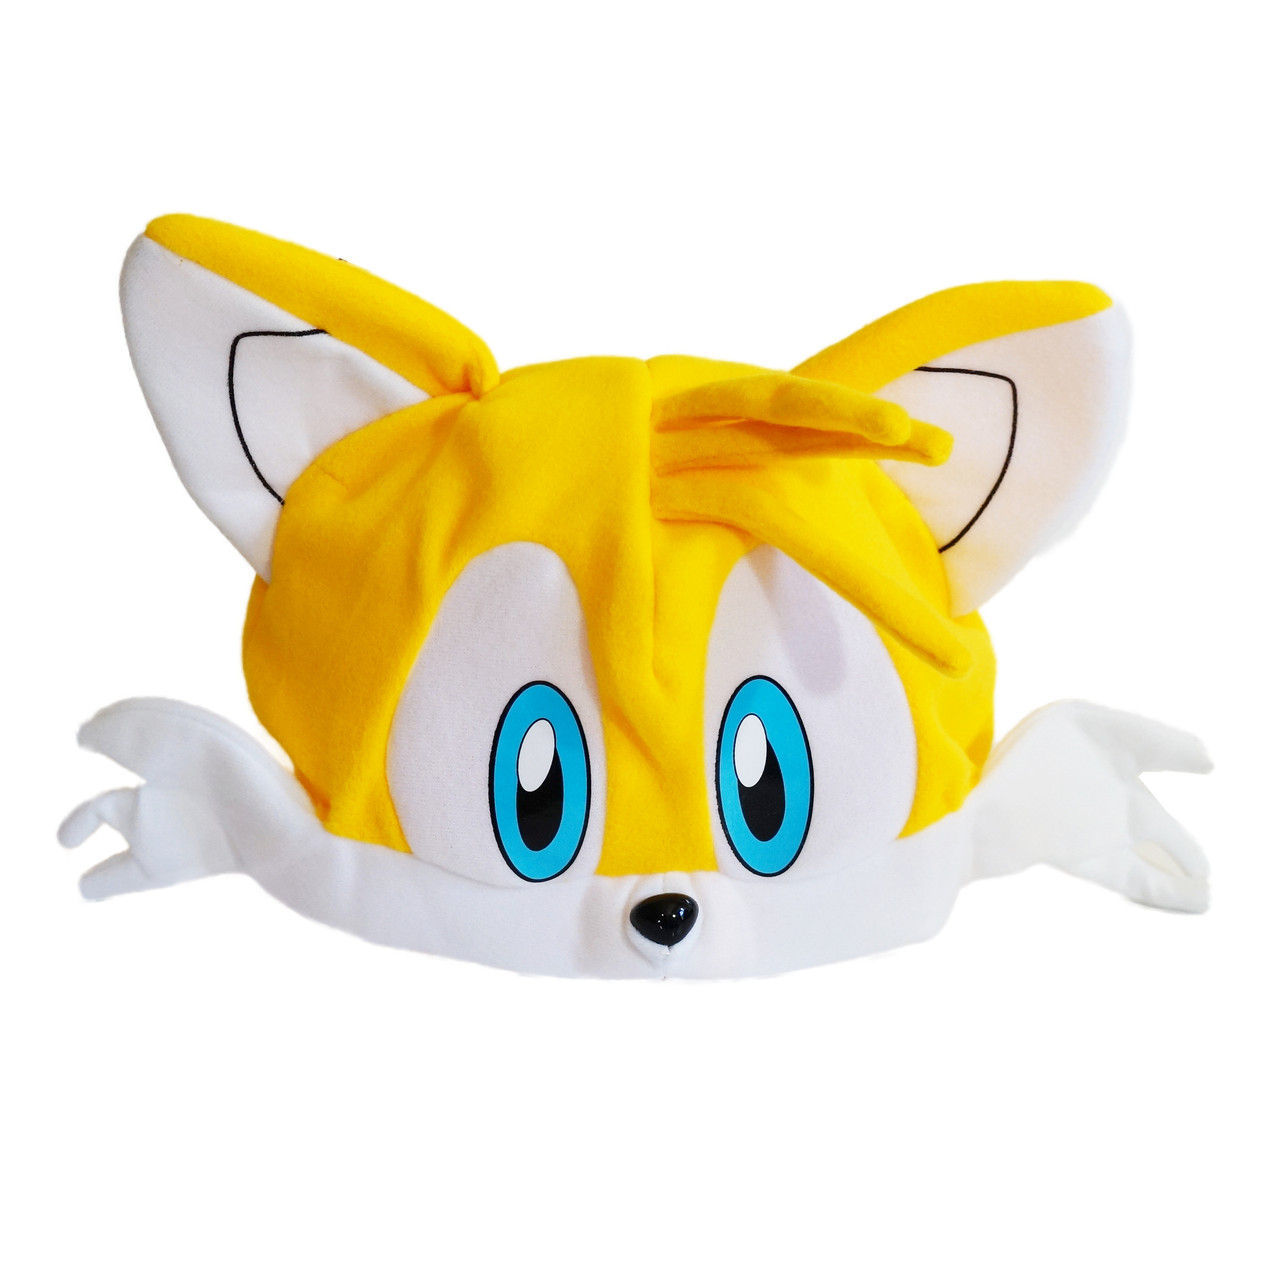 Sonic the Hedgehog: Classic Tails Fleece Cosplay Cap - Circle Red